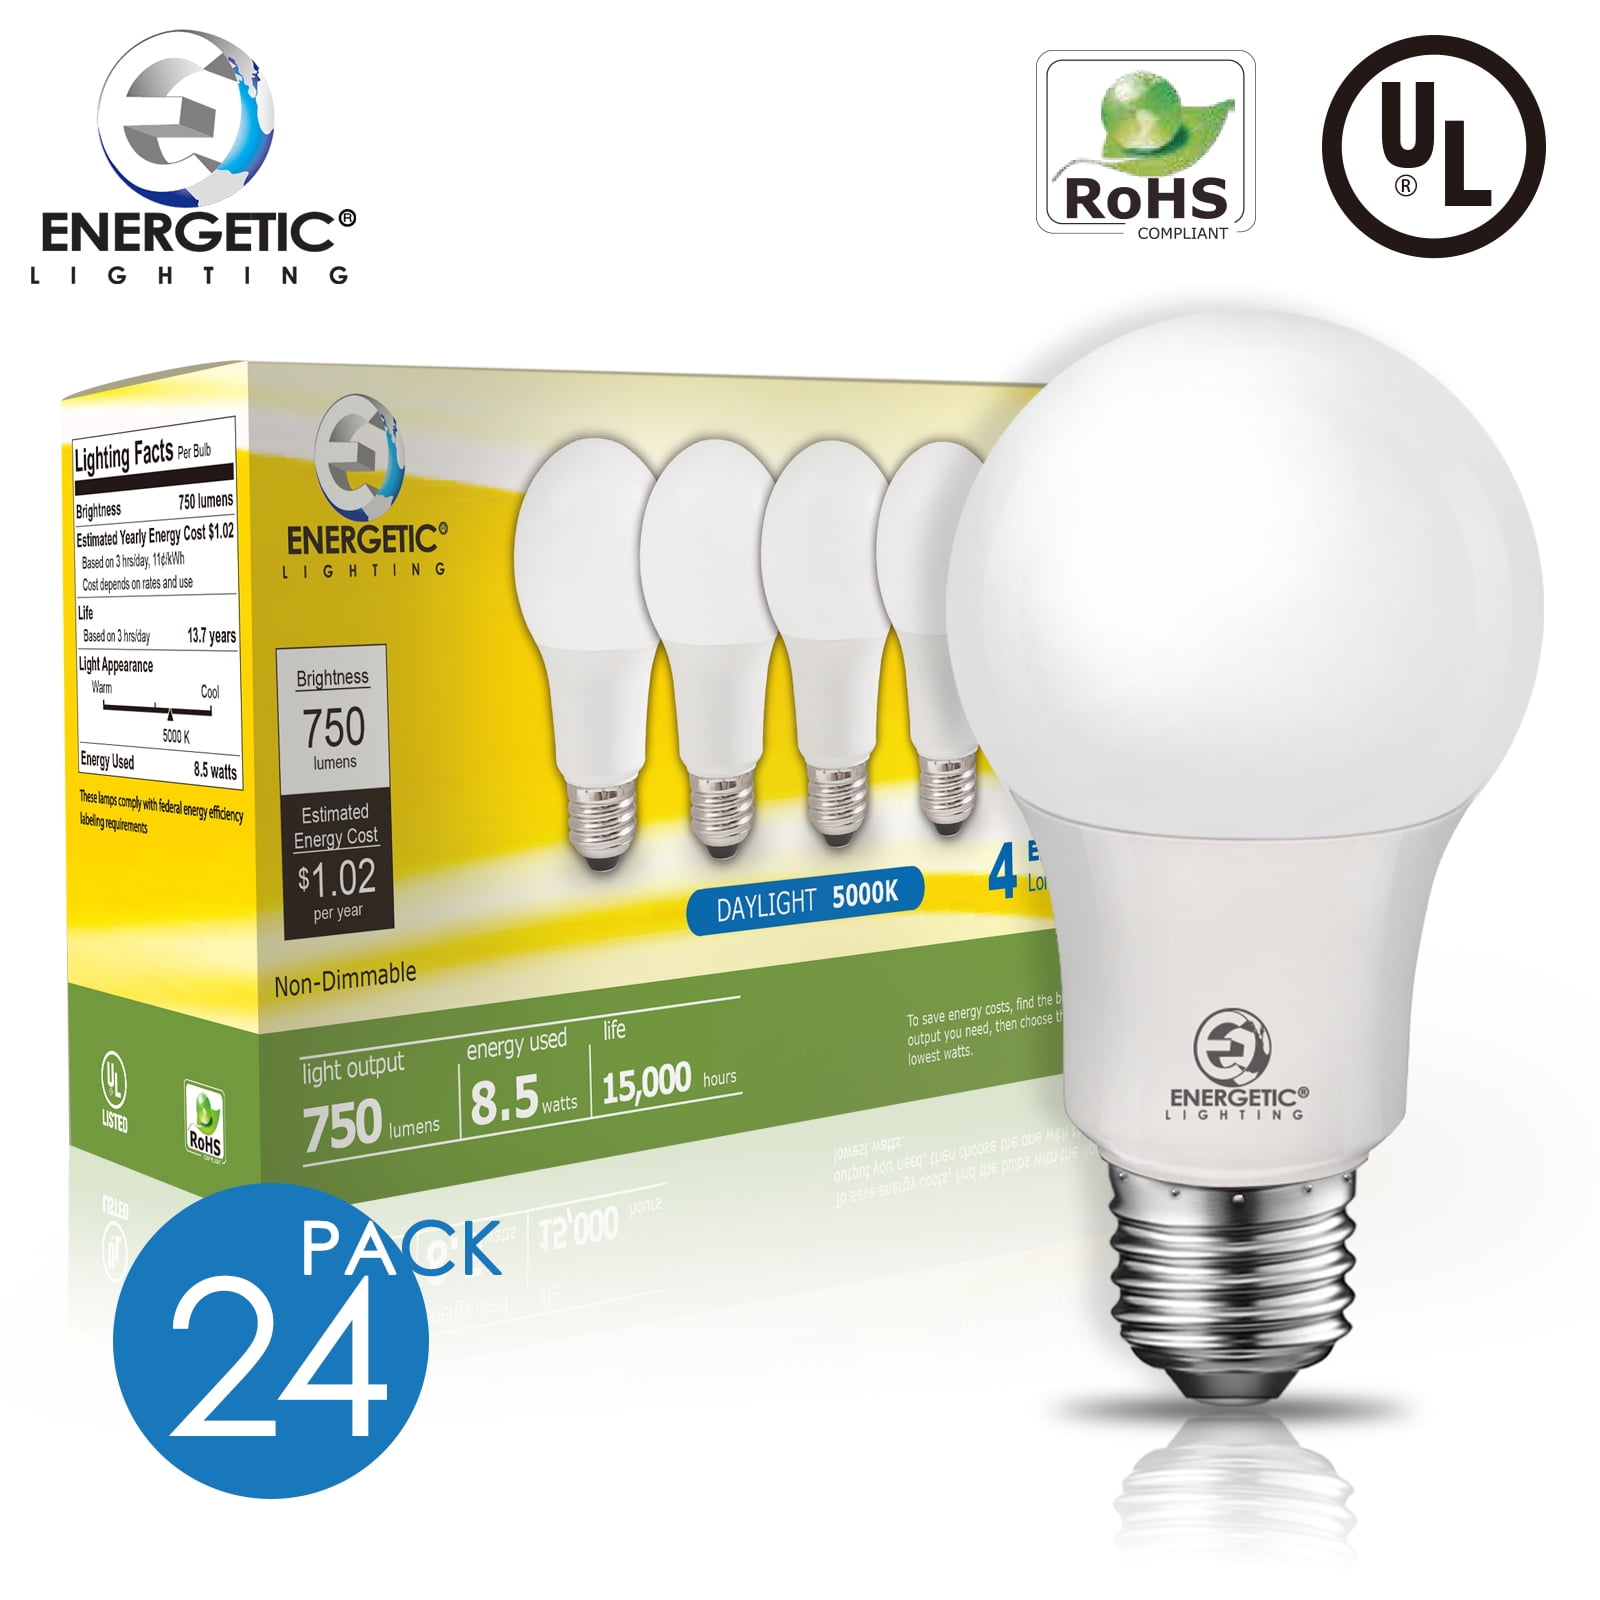 ENERGETIC A19 Light Bulb, 8.5 Watts(60W Equivalent), Daylight, E26 Base, 750lm, UL Listed, 24 Pack -